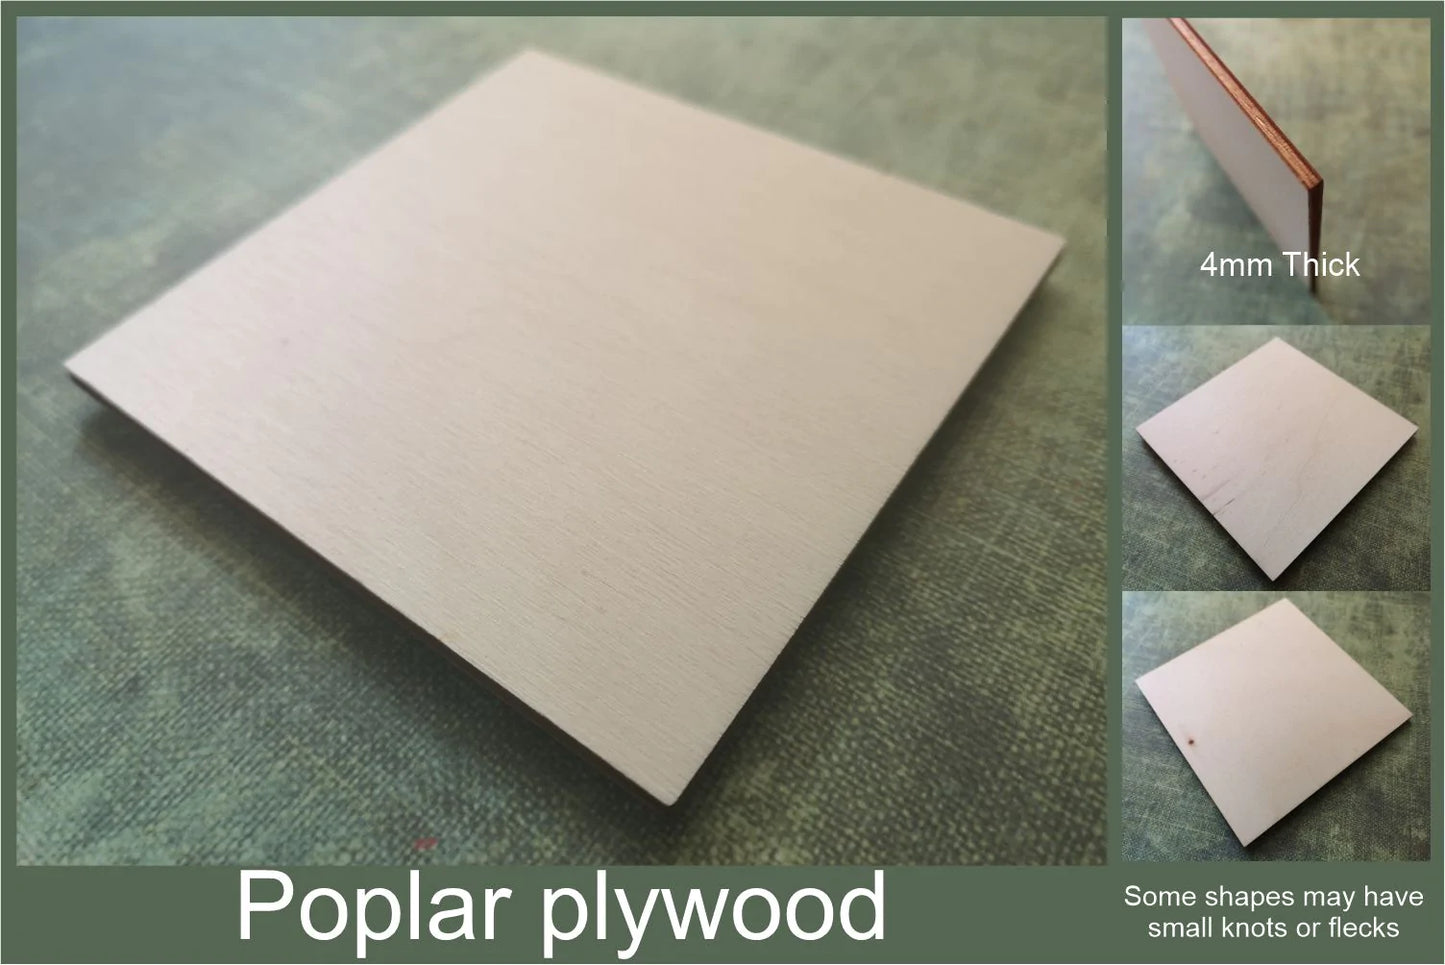 4mm thick poplar plywood used to make the Corgi cut-outs ready for crafting